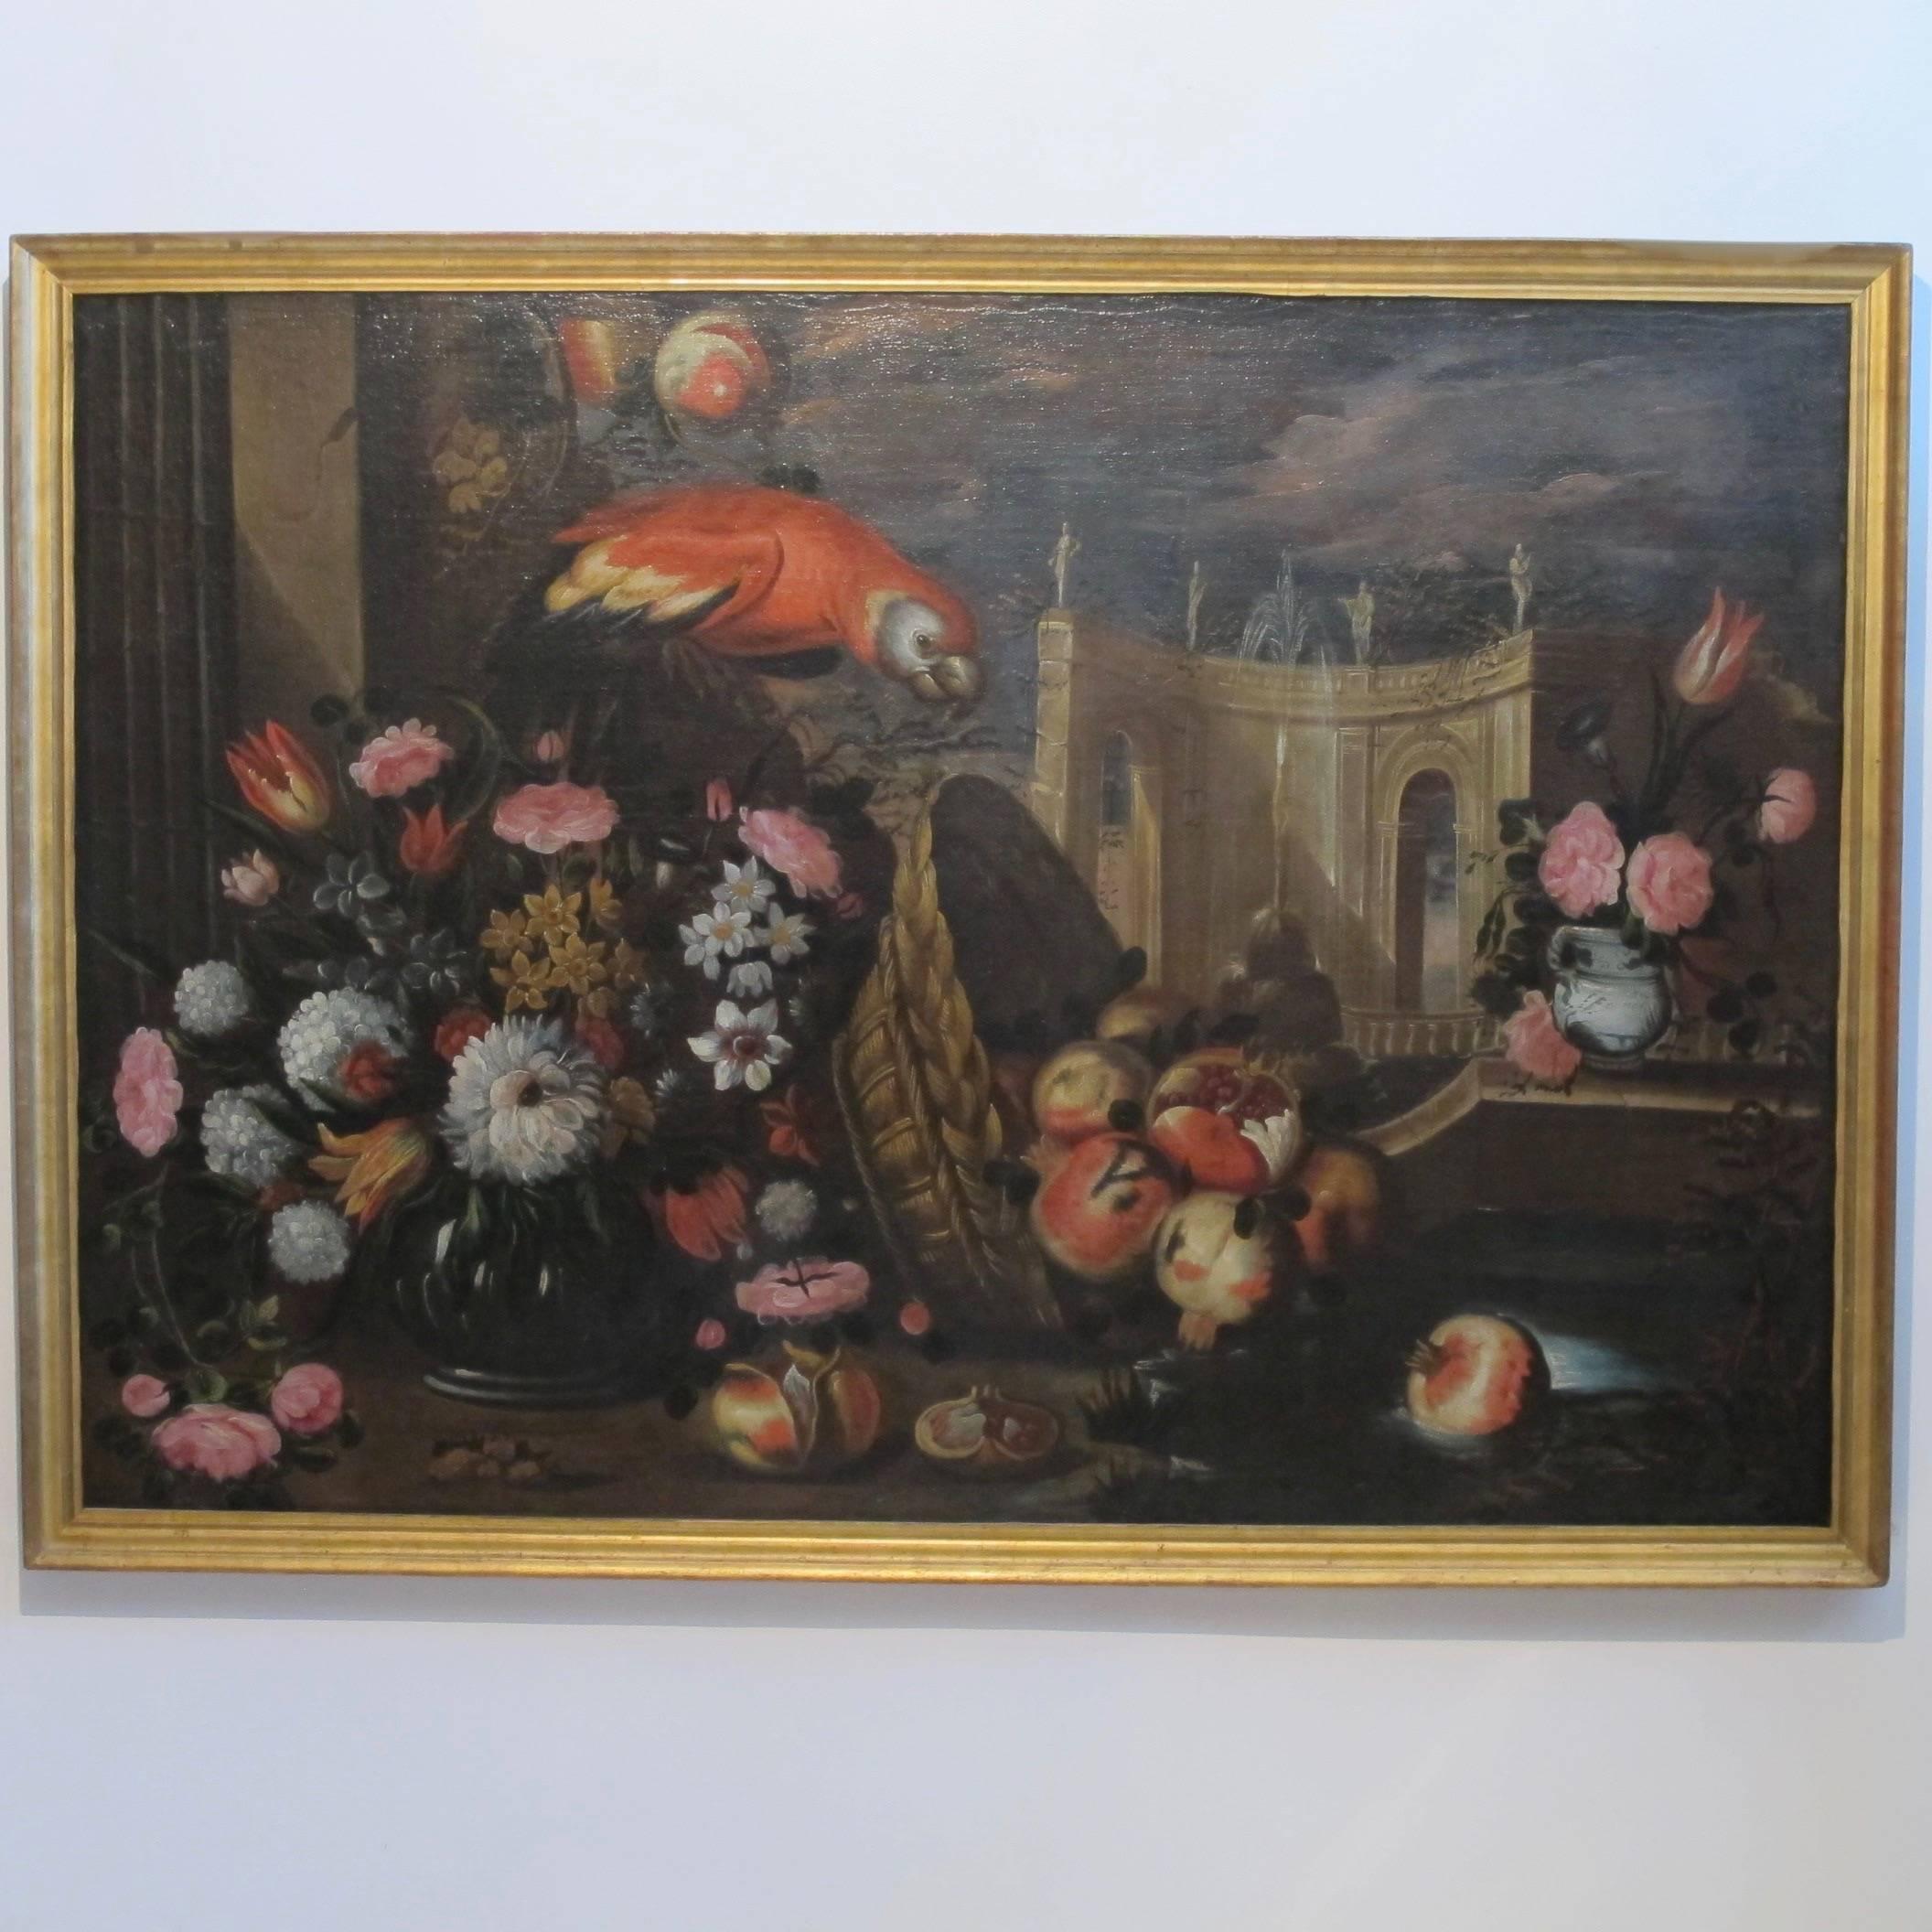 A very large, impressive, and beautifully painted Baroque era still life with a colorful parrot and flowers. Oil on canvas in giltwood frame. Italy, late 17th century-early 18th century.
Measurements of just the painting without the frame are 41